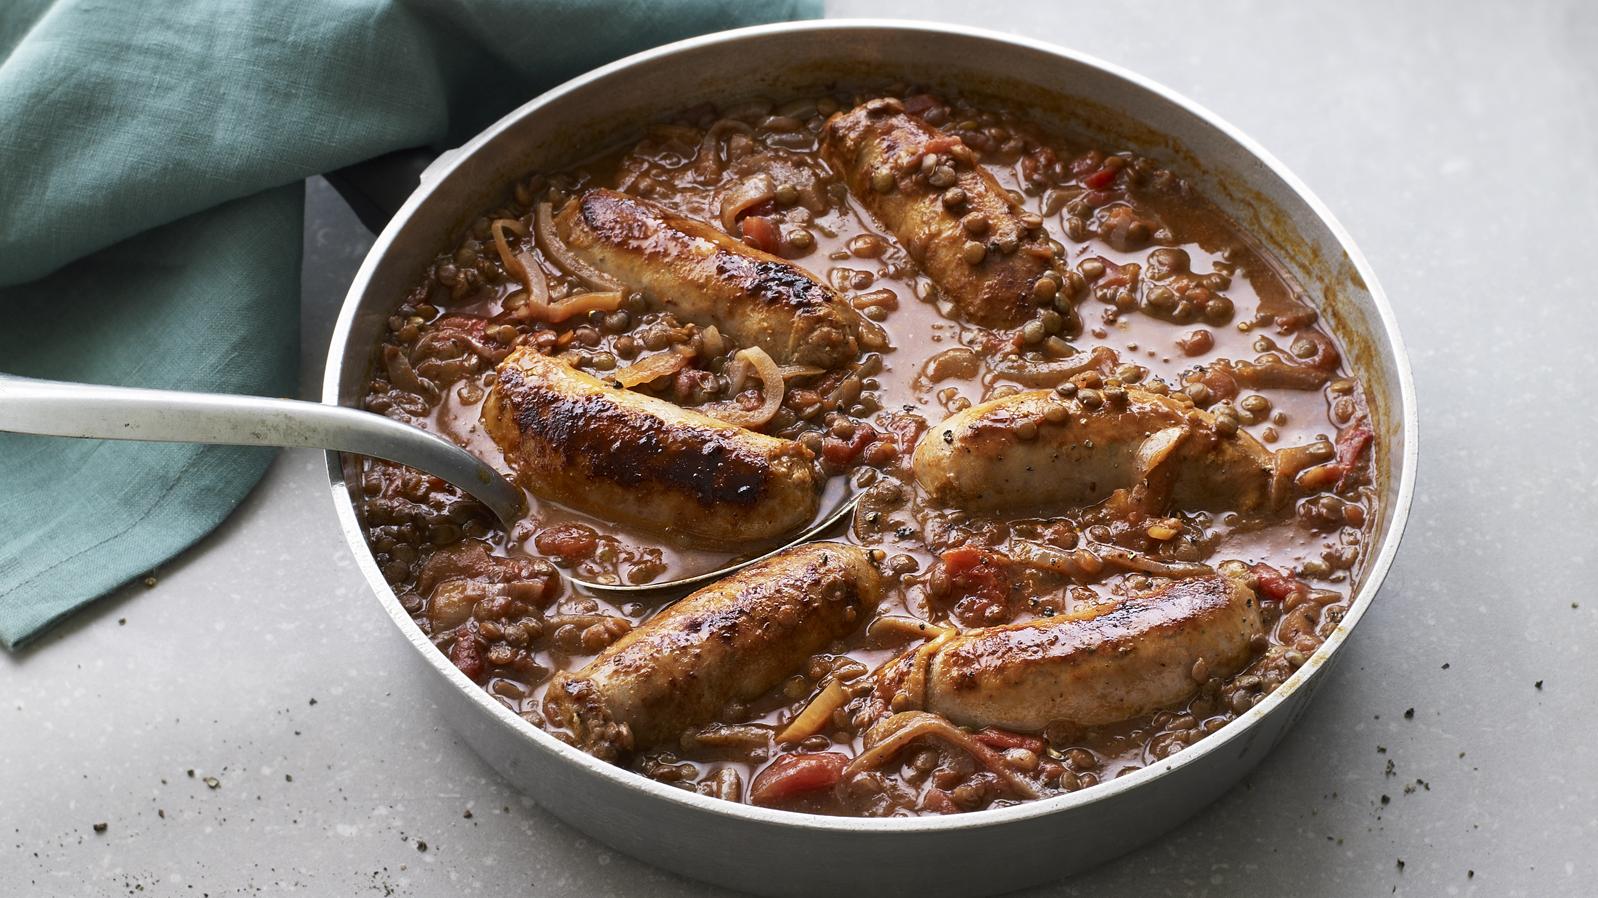  Lentils, carrots, and celery team up with the Lincolnshire sausages to create a satisfying and luxurious stew.